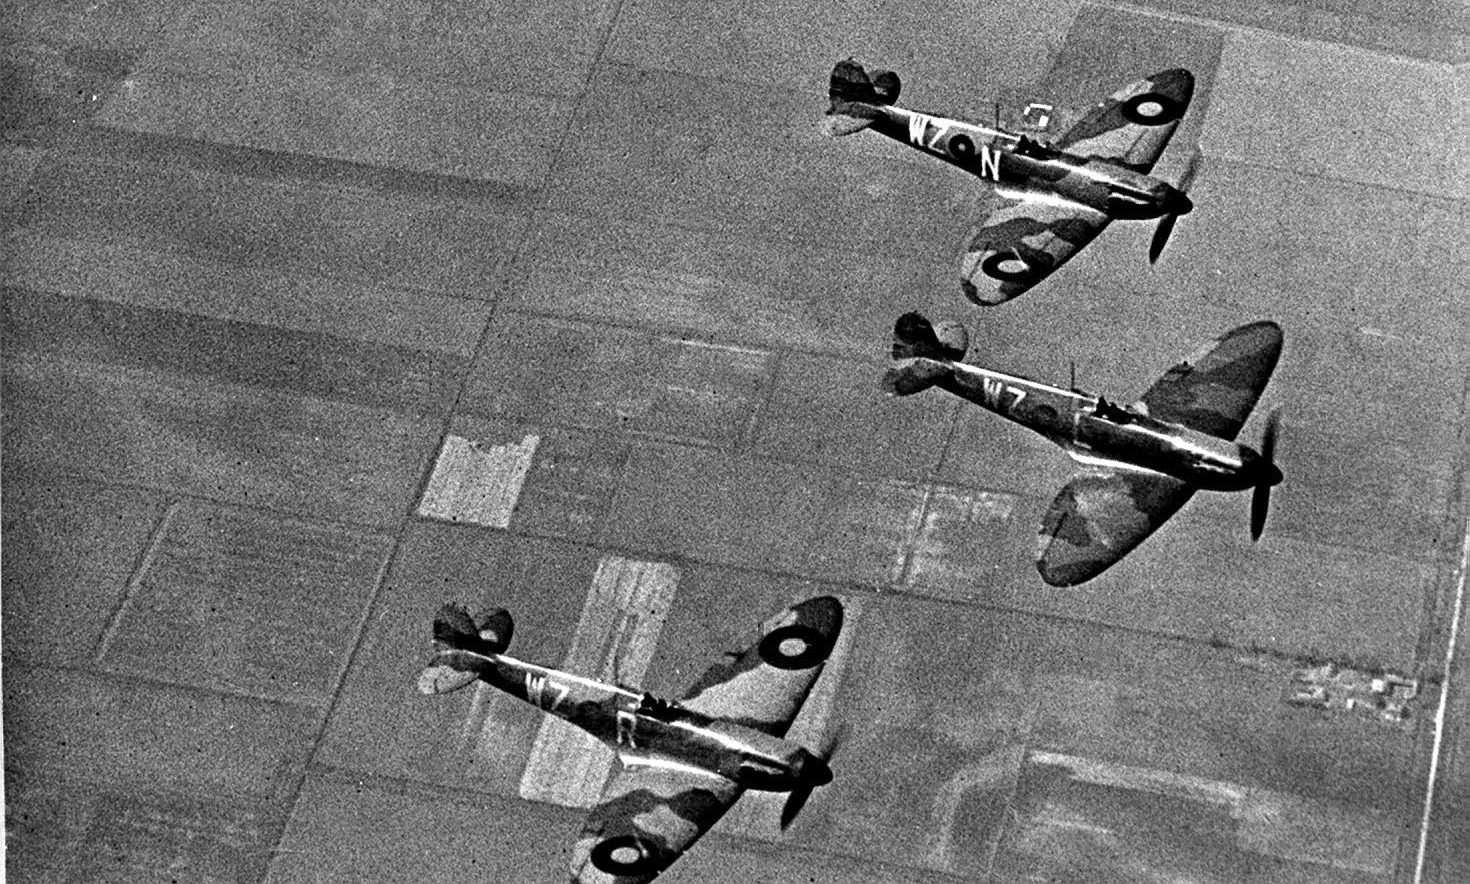 No.19 Fighter Squadron Supermarine Spitfires flying in formation at Duxford in 1939 prior to the Battle of Britain.